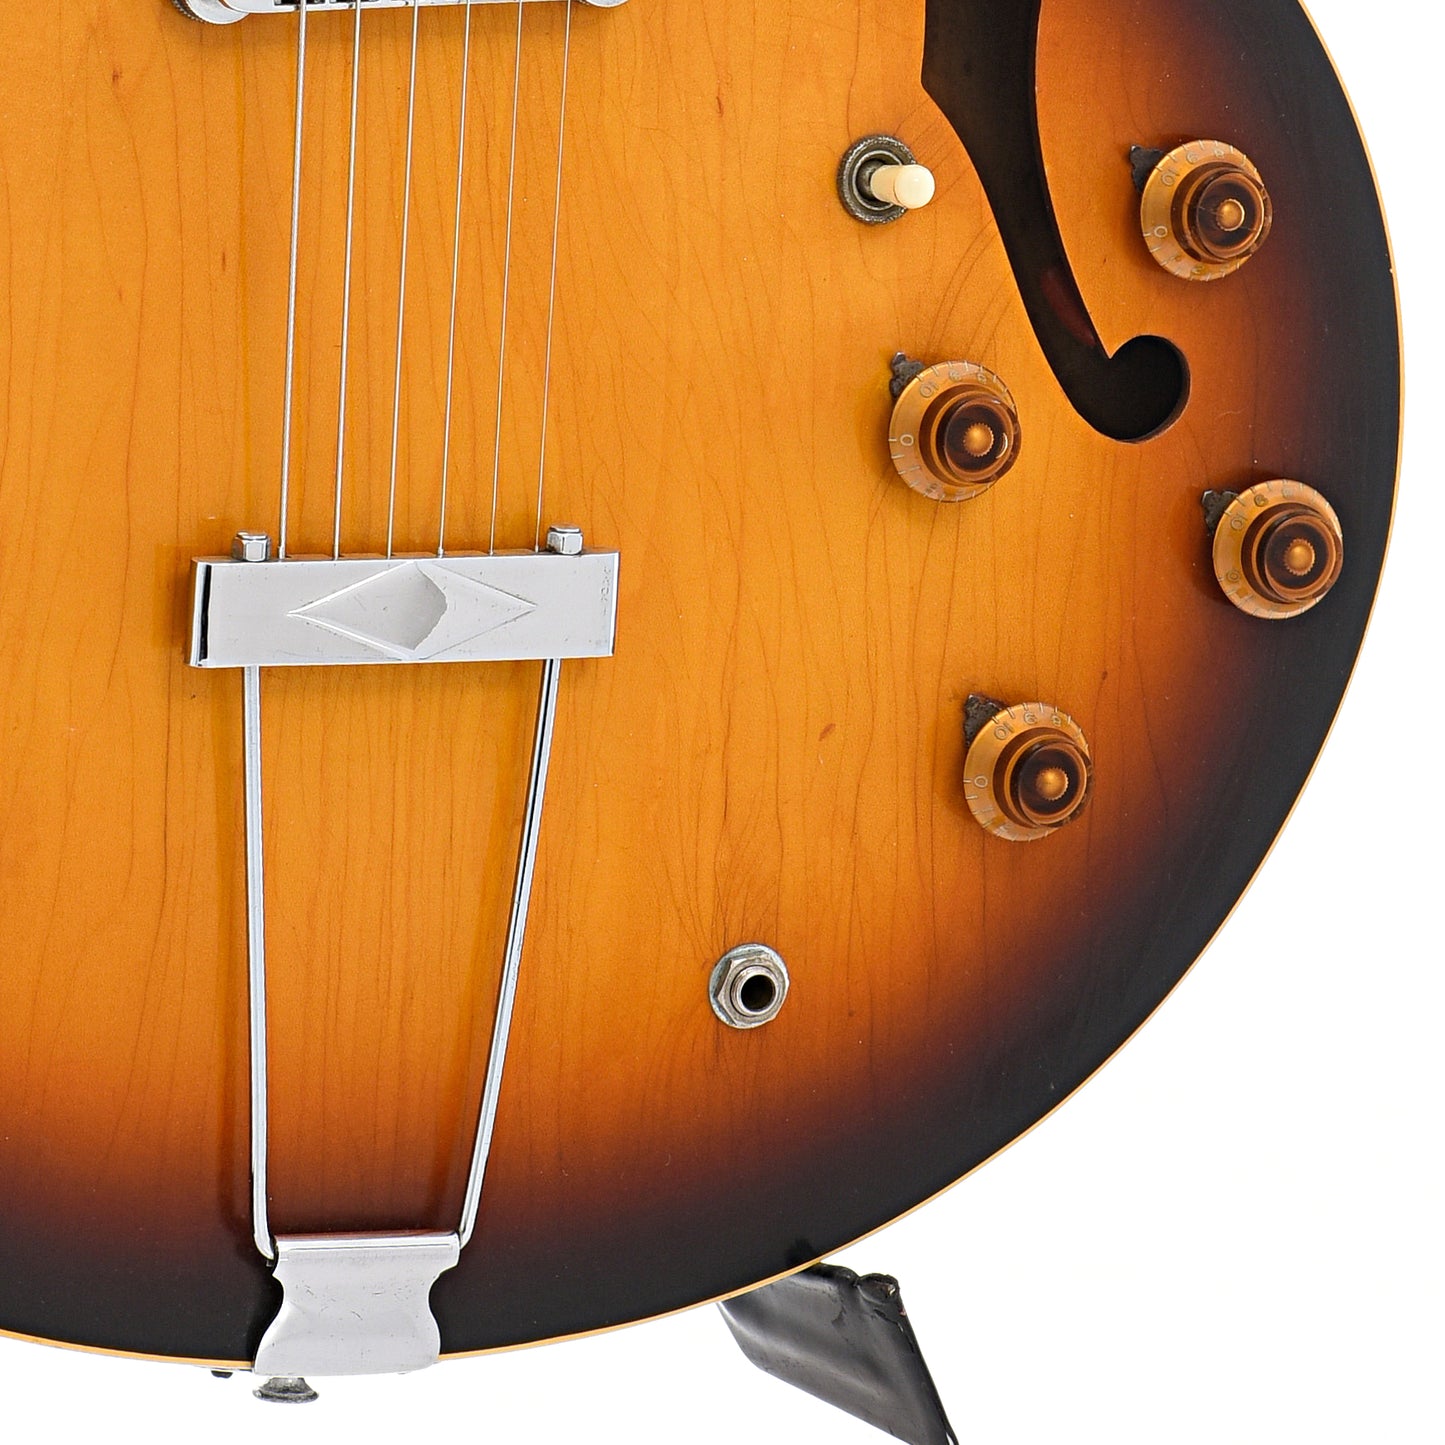 Tailpiece and controls of Gibson ES-330TD Hollow Body Electric Guitar (c.1968)